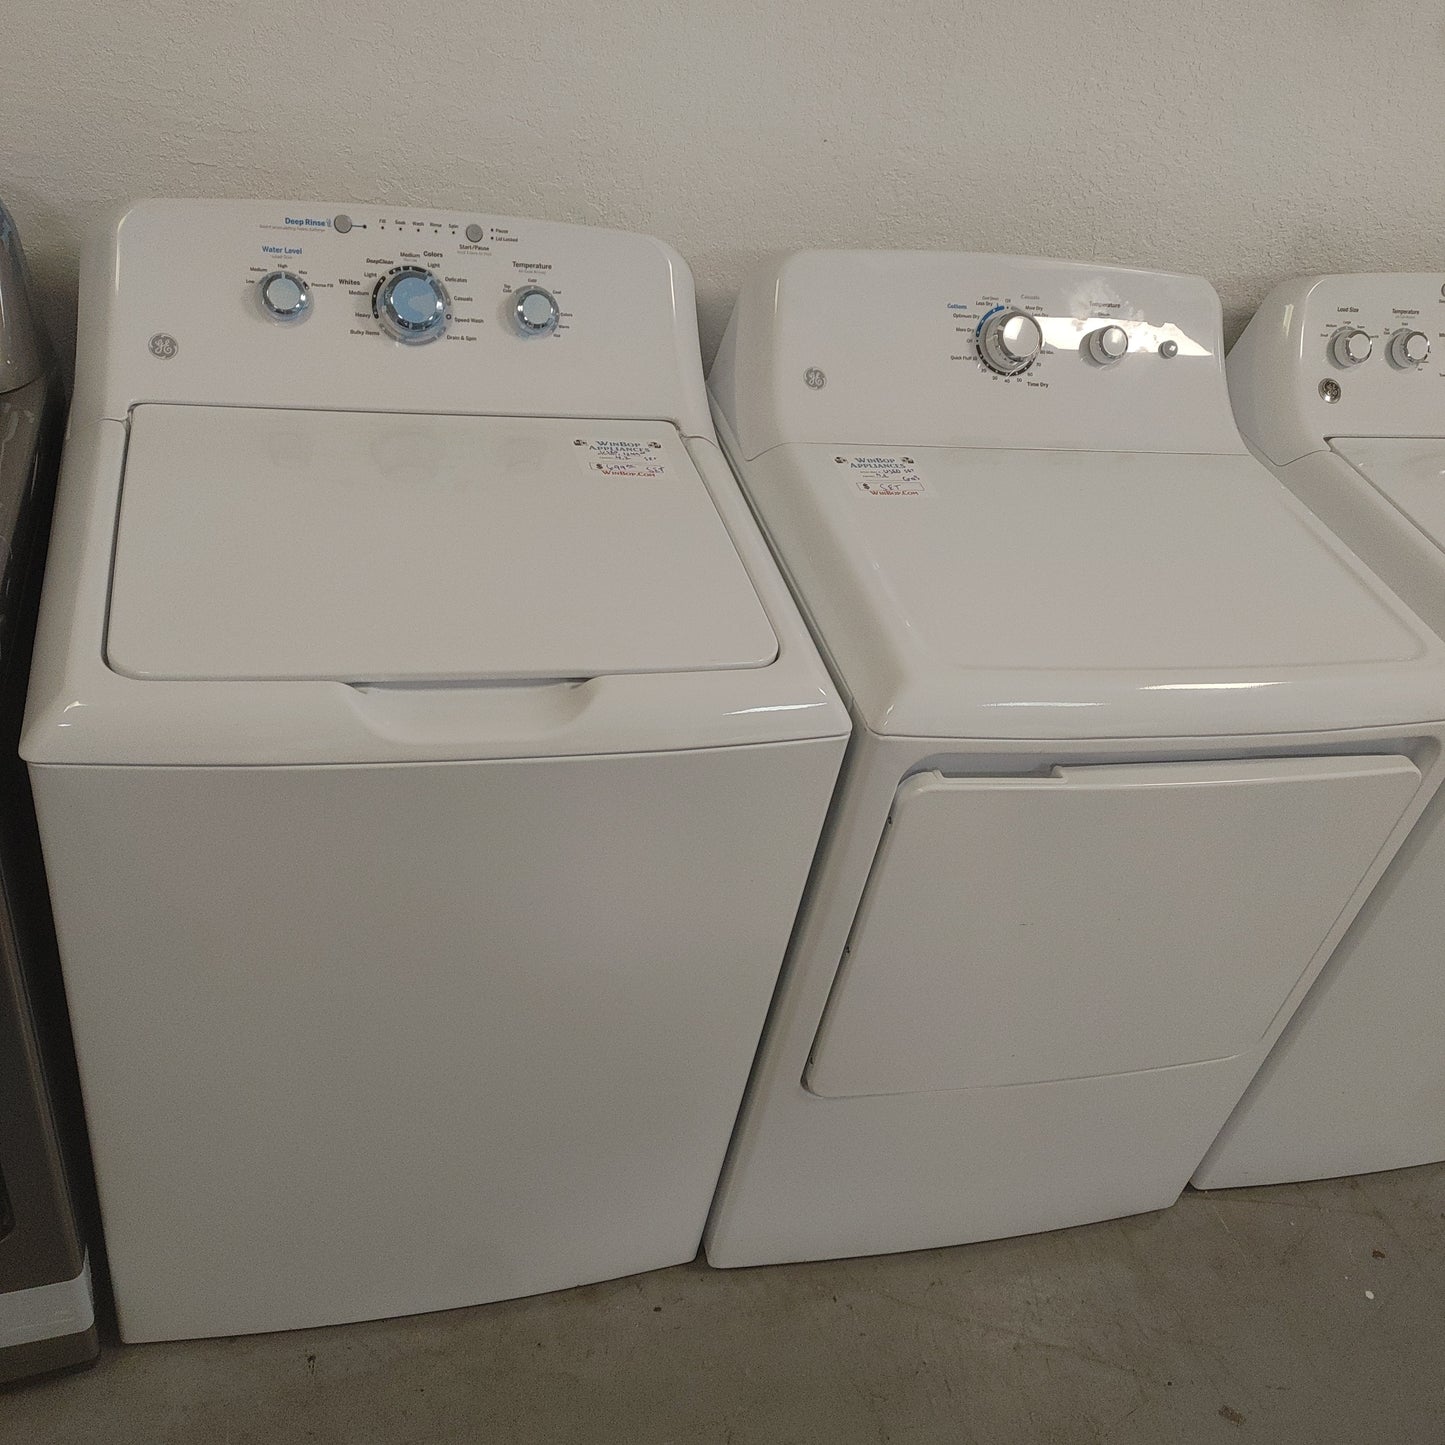 Used GE 4.2 Cubic Ft Top Load Washer and 7.2 cubic ft Gas Dryer